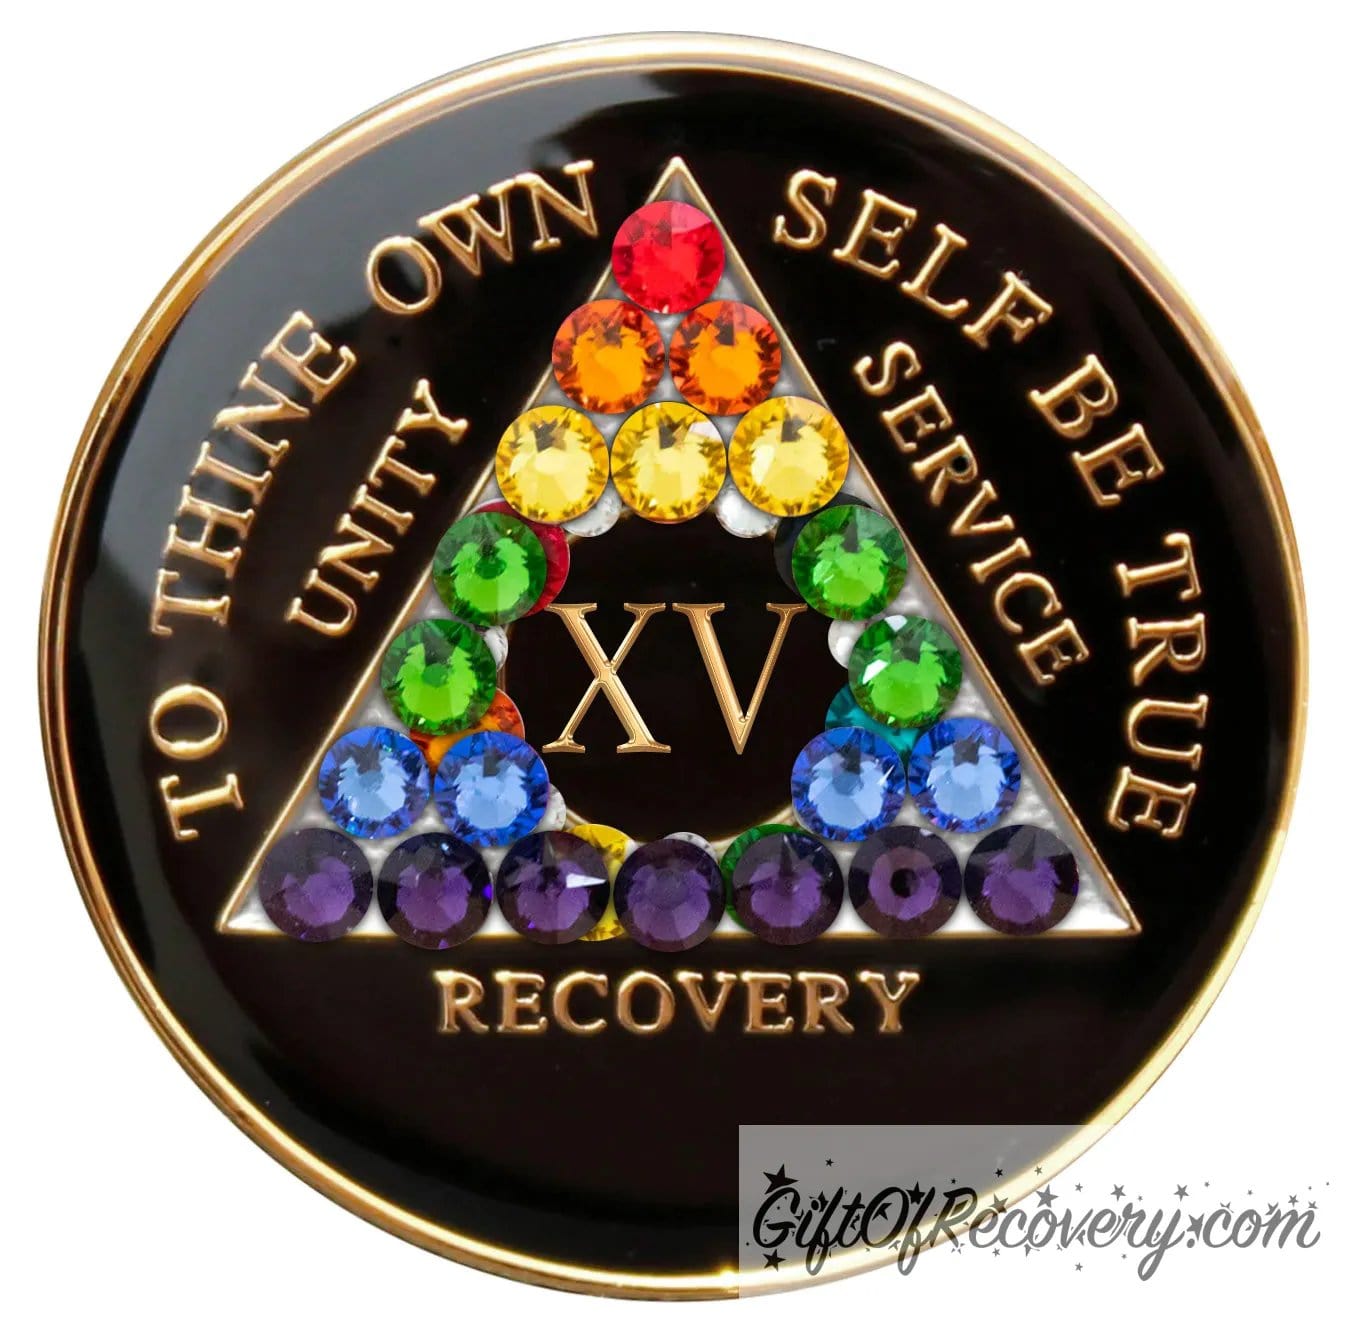 15 year AA medallion with 21 rainbow genuine crystals to represent the LBGTQIA+ community, show your pride with this Black onyx resin sealed recovery medallion that has 14k gold plated brass lettering of to thine own self be true, unity, service, recovery, and the roman numeral.